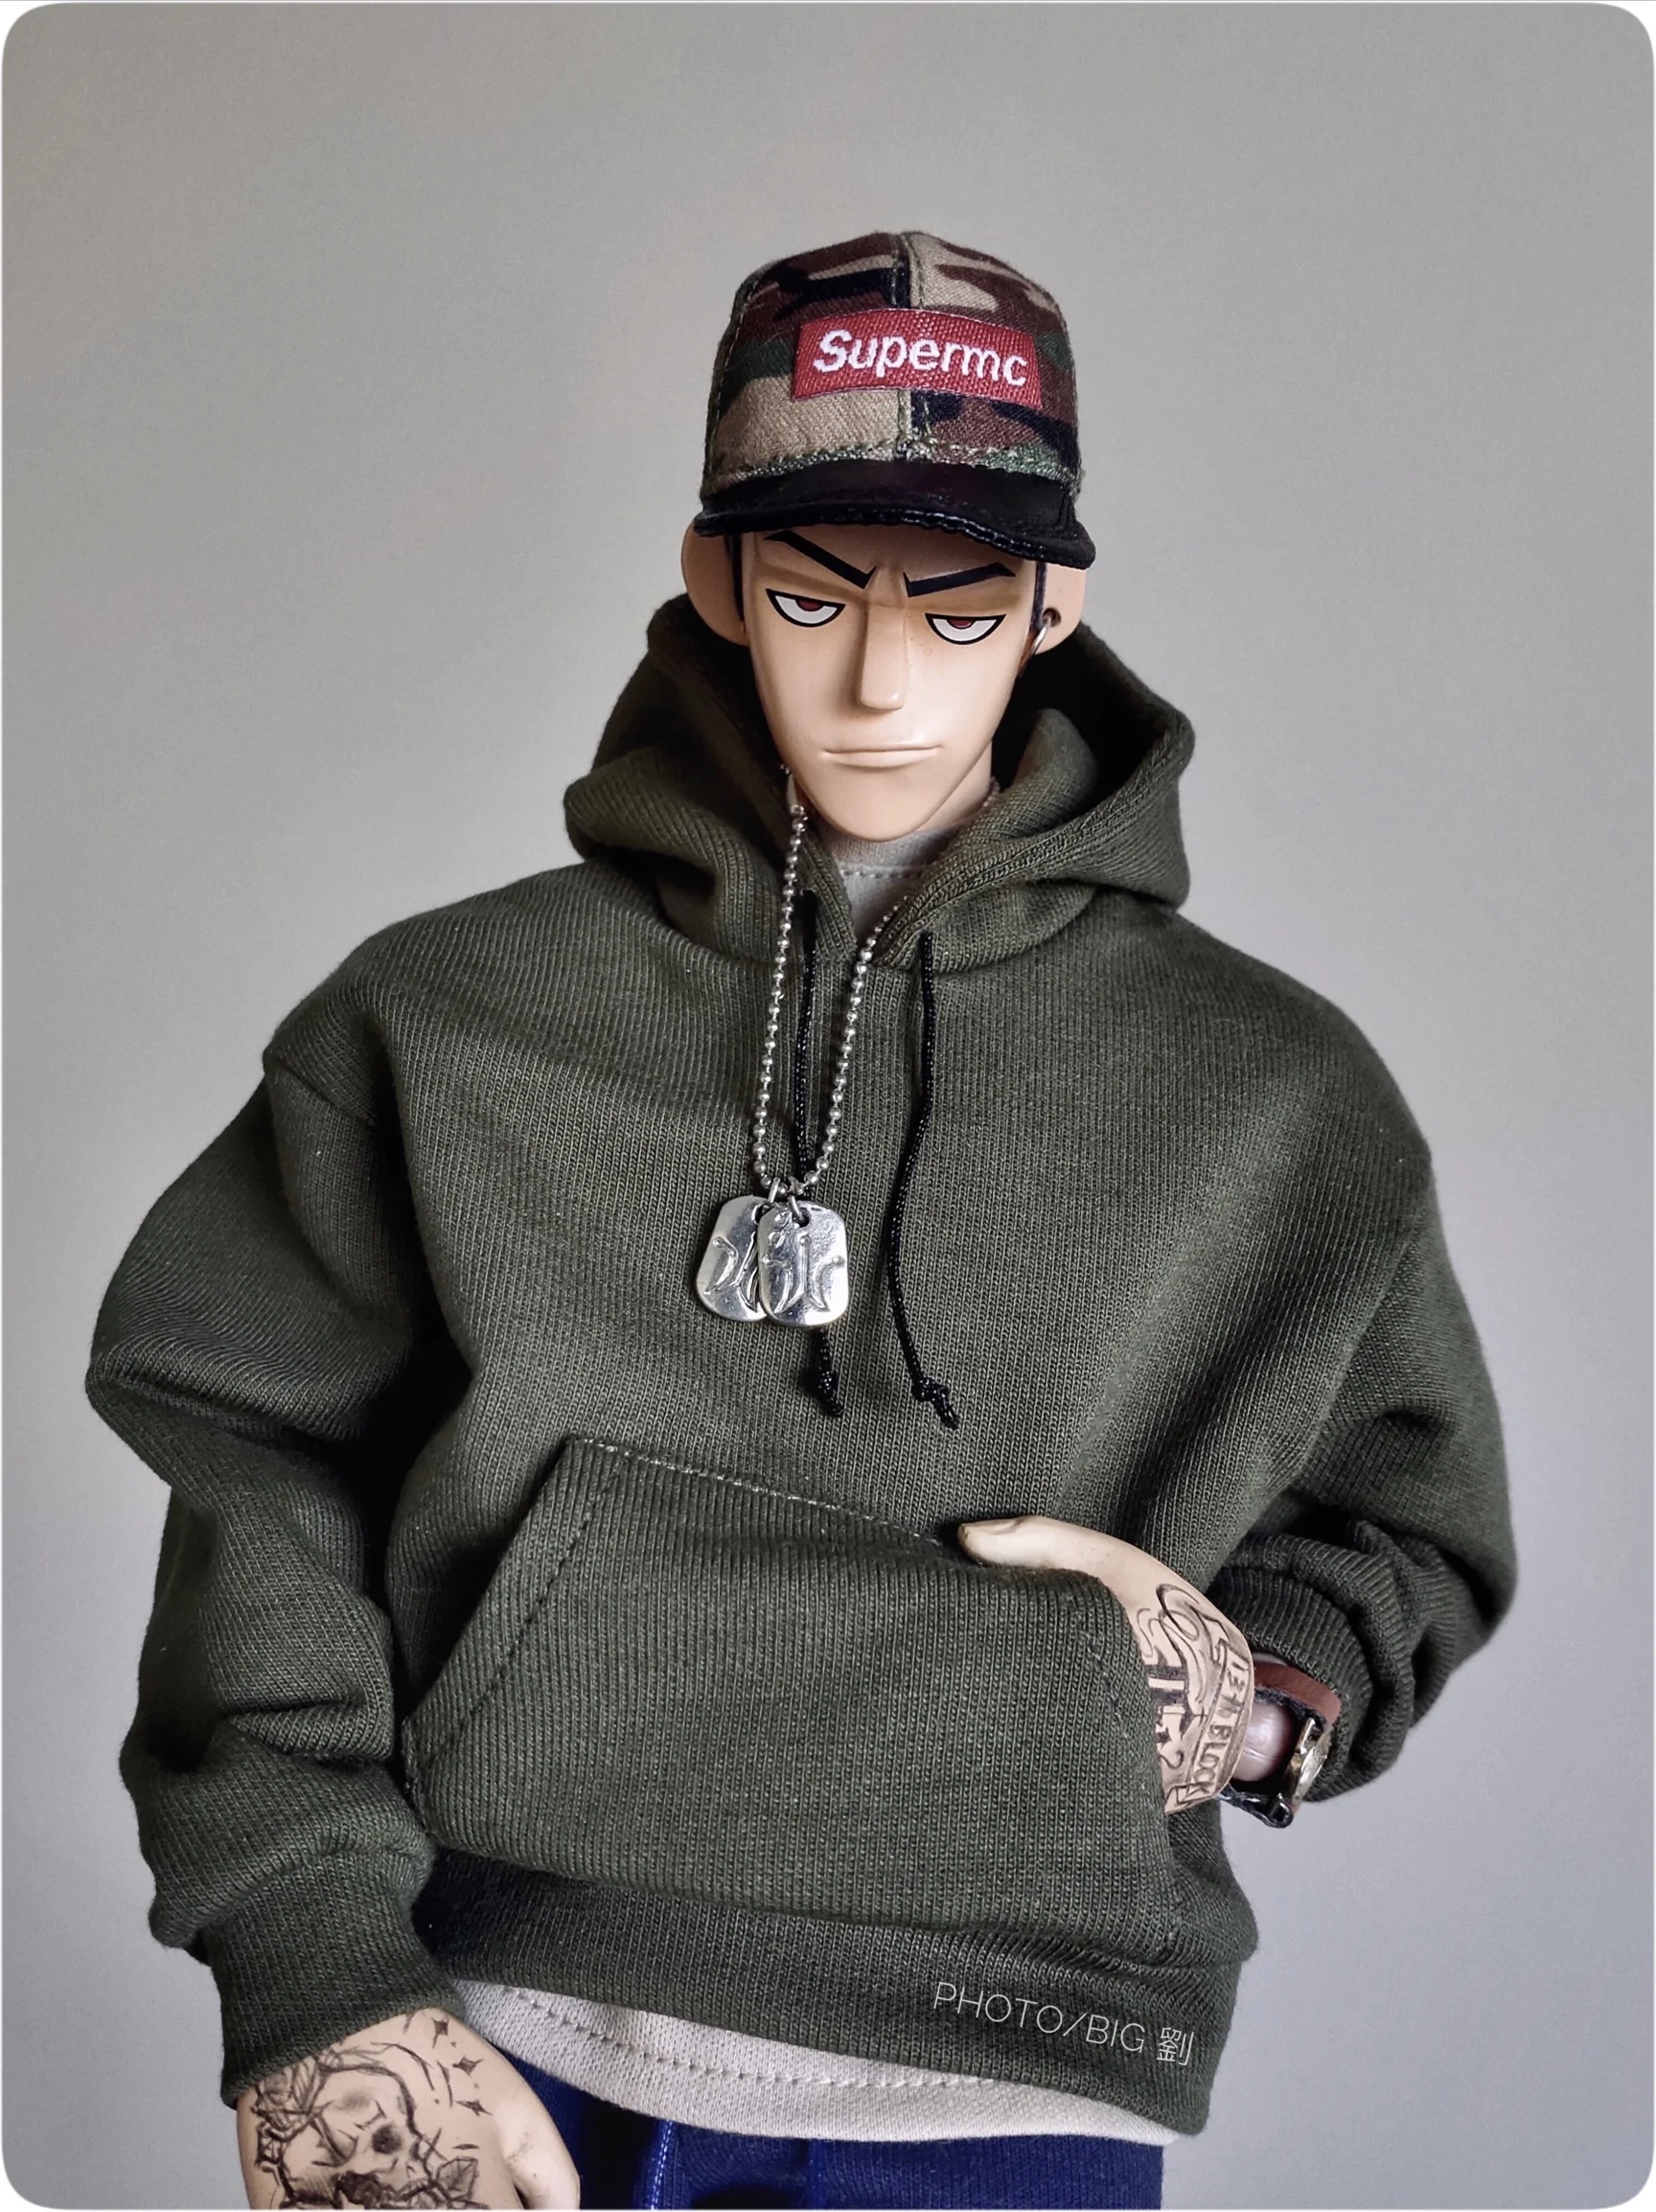 

1/6 Men's Soldier Sweatshirt 12-inch Trendy Doll Oversized Hoodie Shirt for Ph Tbl M35 Strong Muscle Body Figures